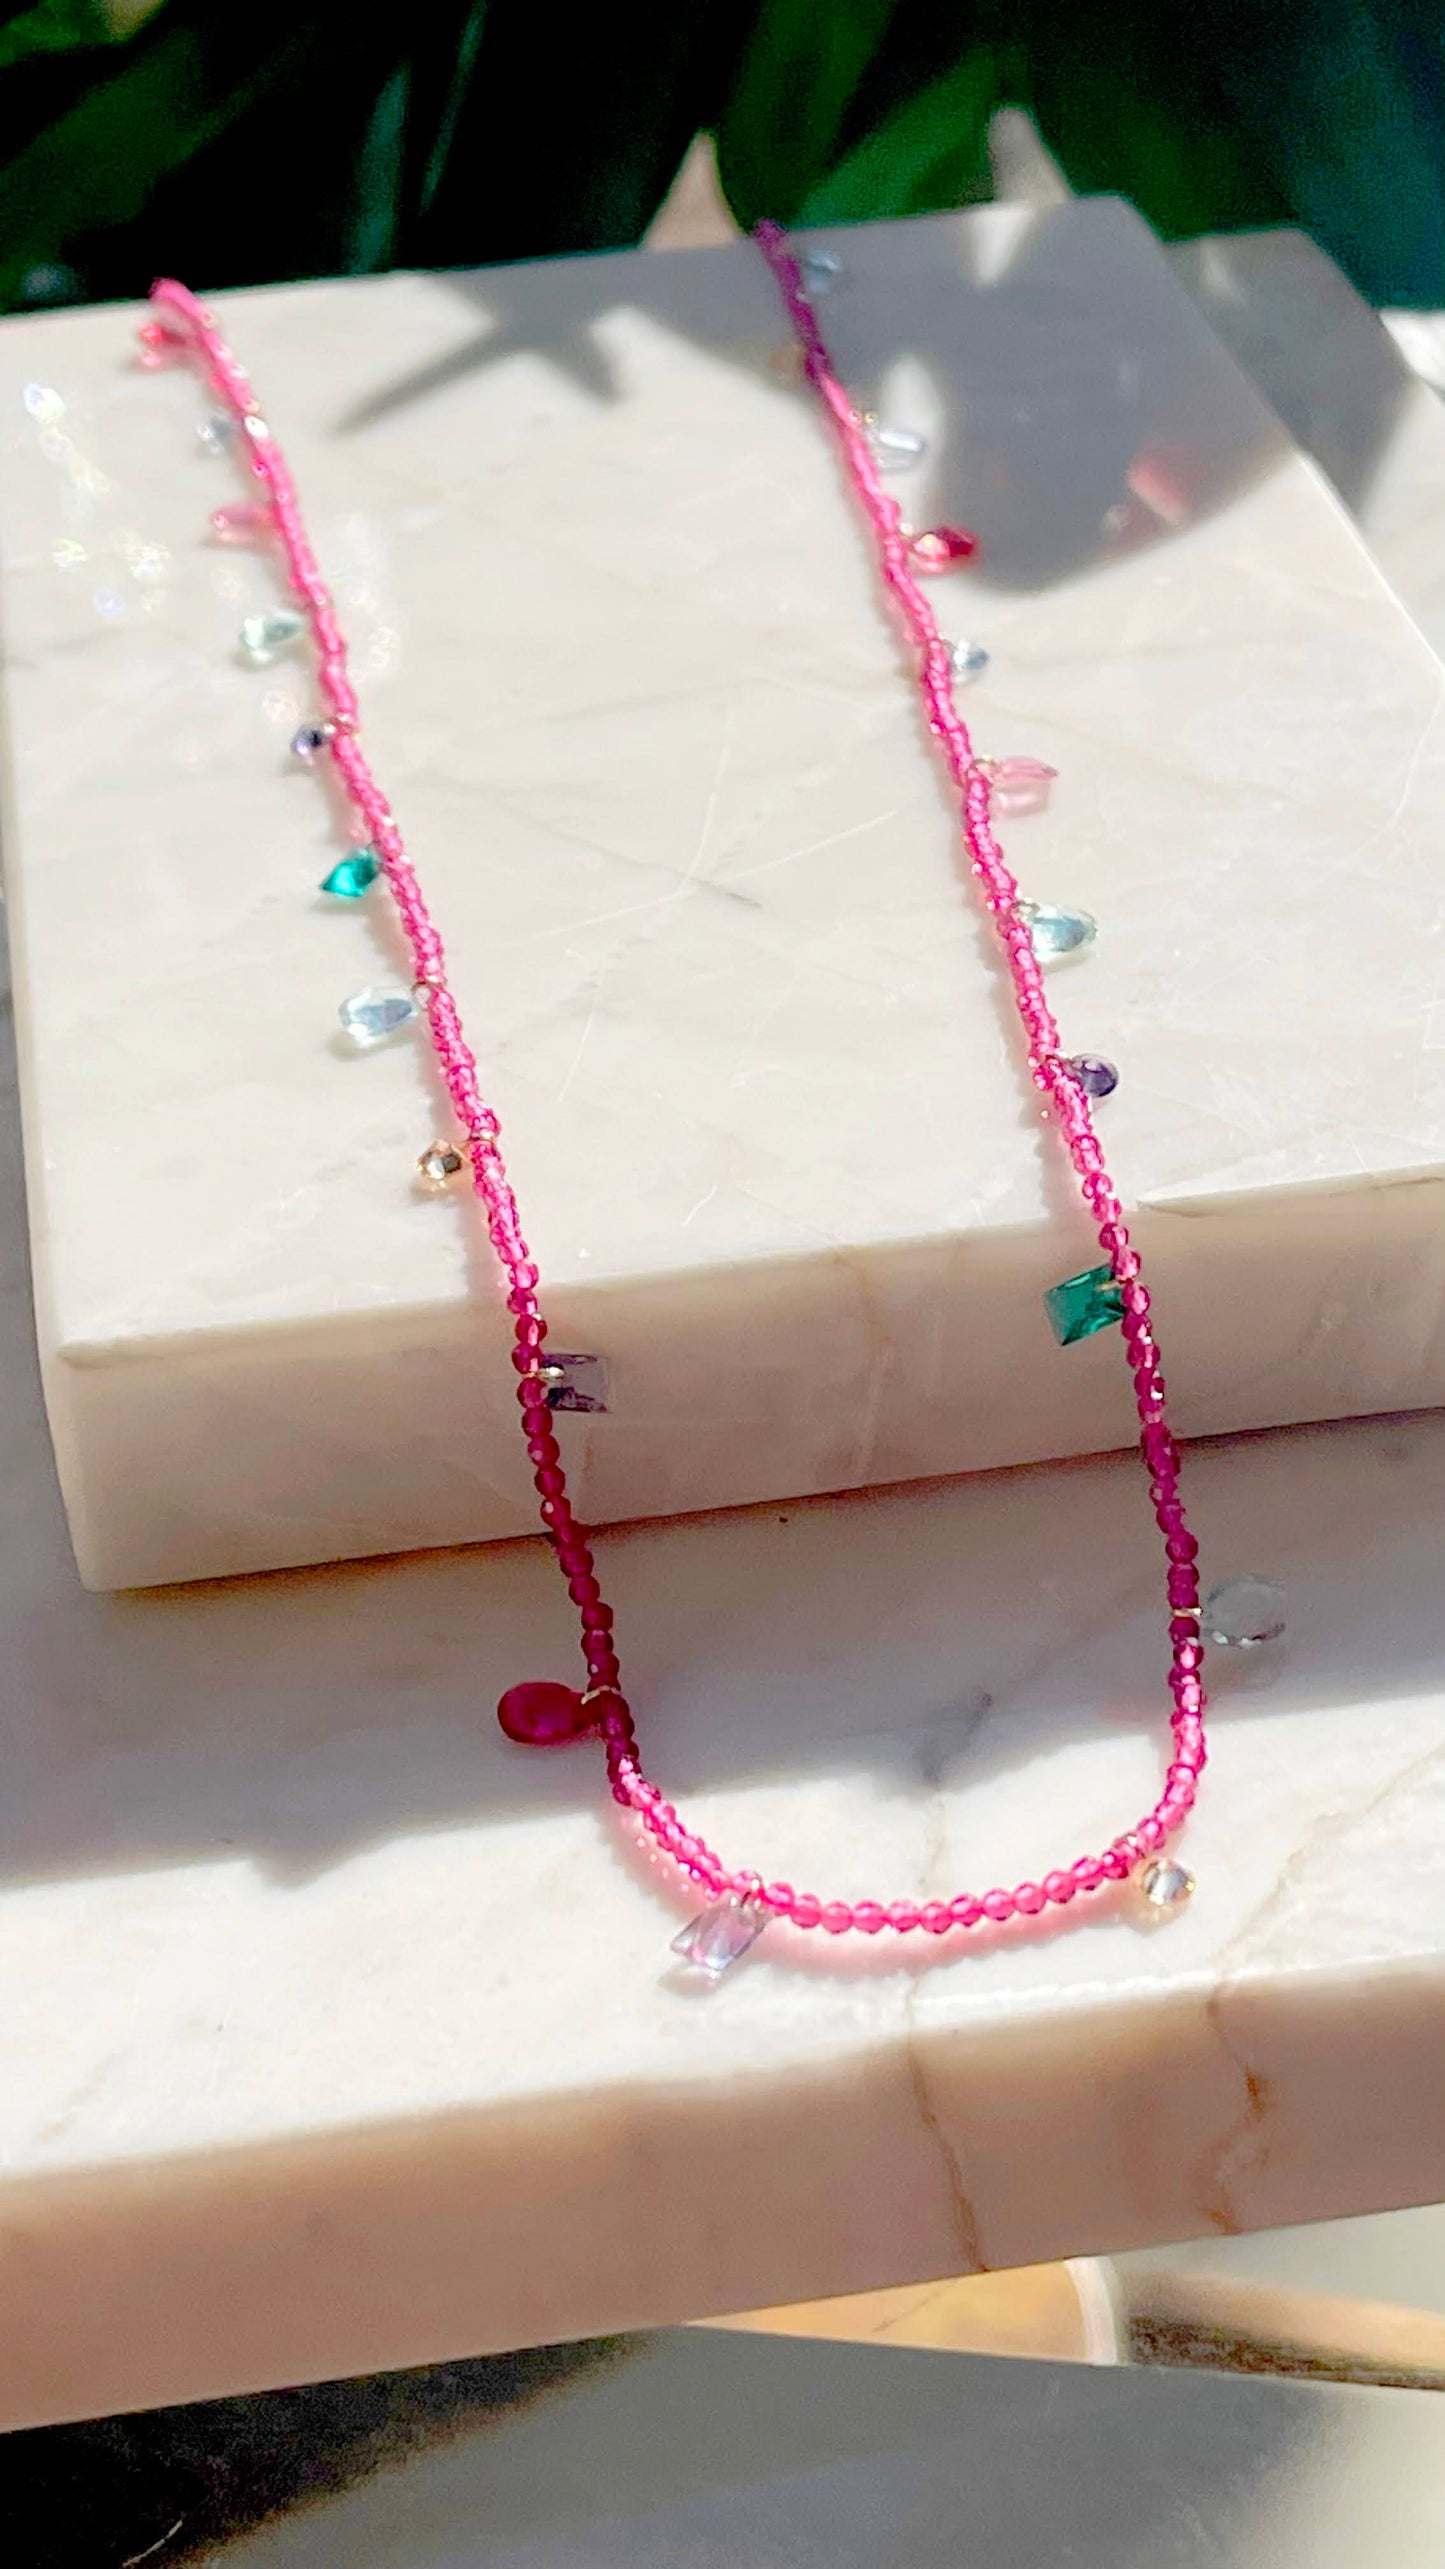 18K gold plated necklace with pink tourmaline and colorful pendants